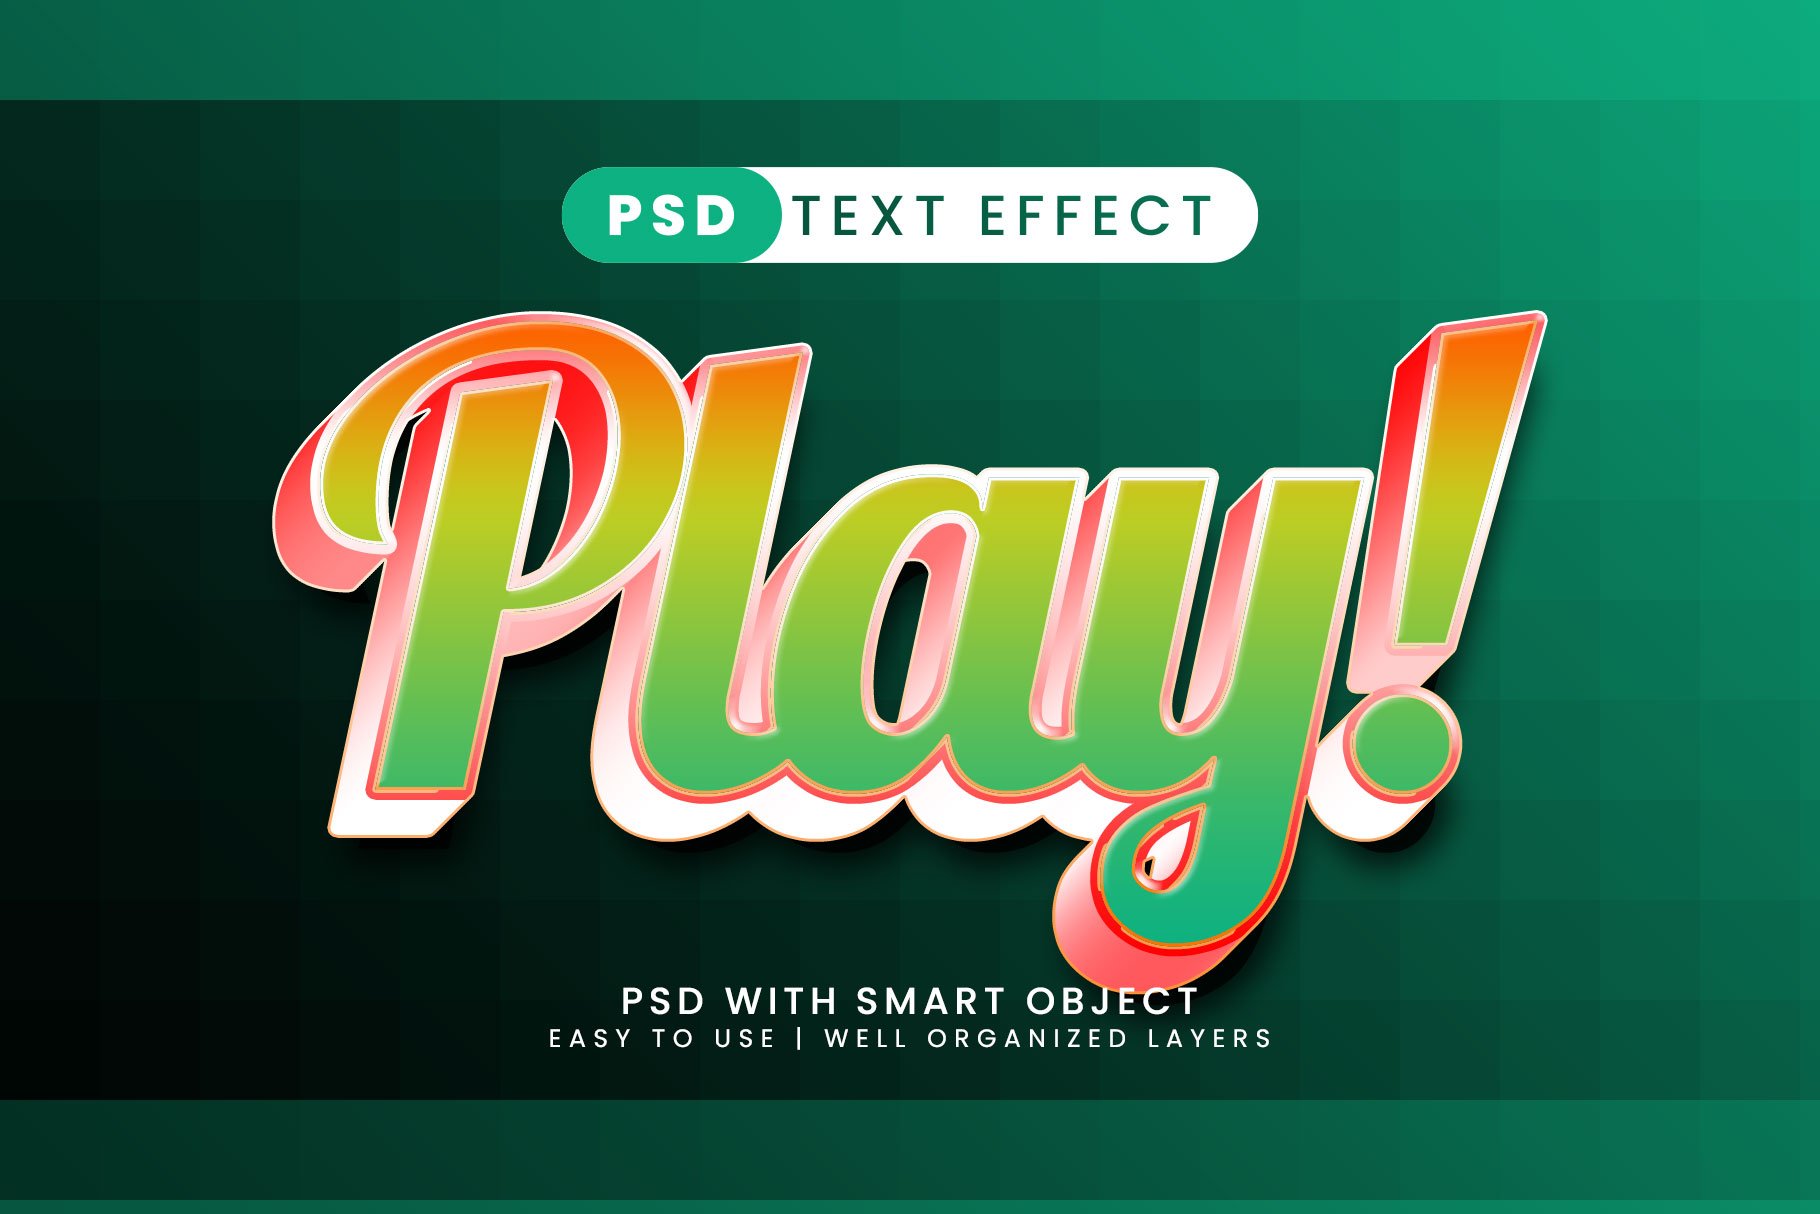 PSD Editable Text Effect Vol. 3preview image.